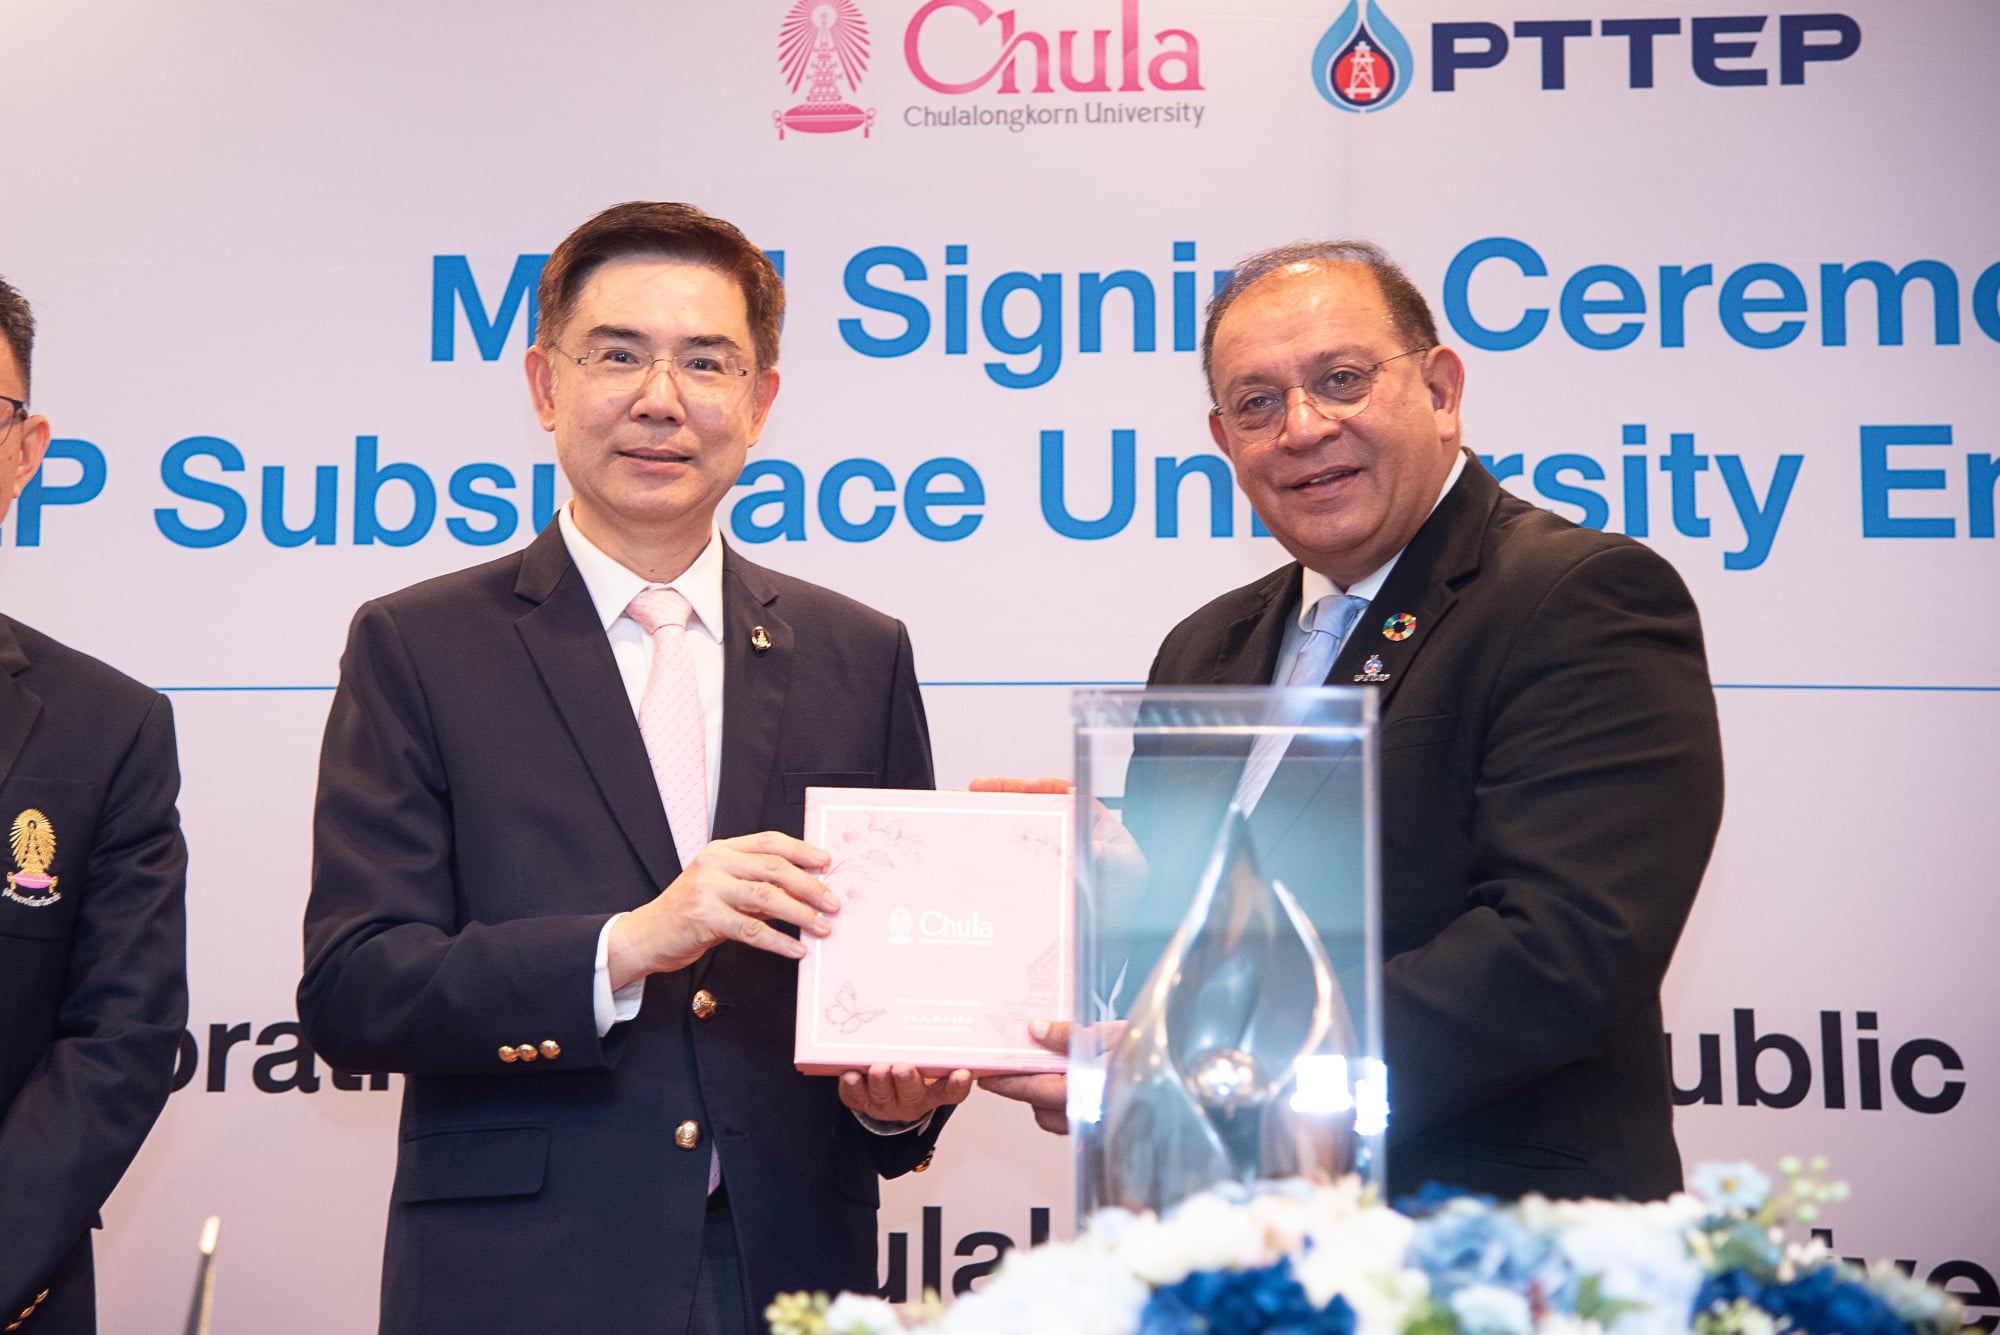 PTTEP Joins Forces with Chula to Develop E&P and CCS Professionals in Thailand-10